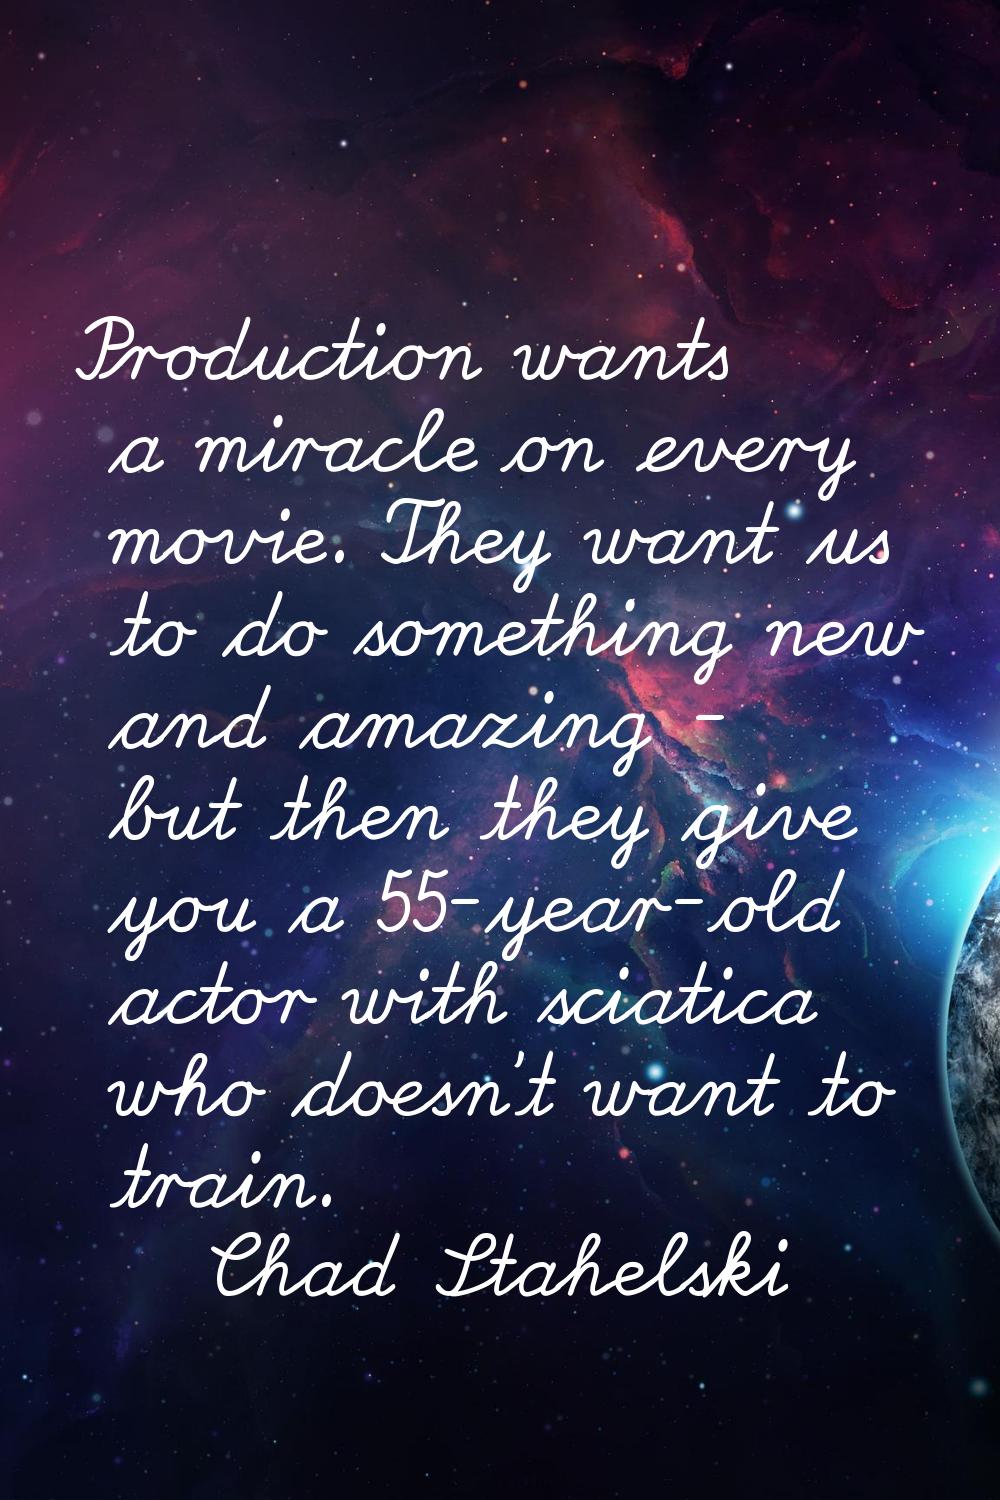 Production wants a miracle on every movie. They want us to do something new and amazing - but then 